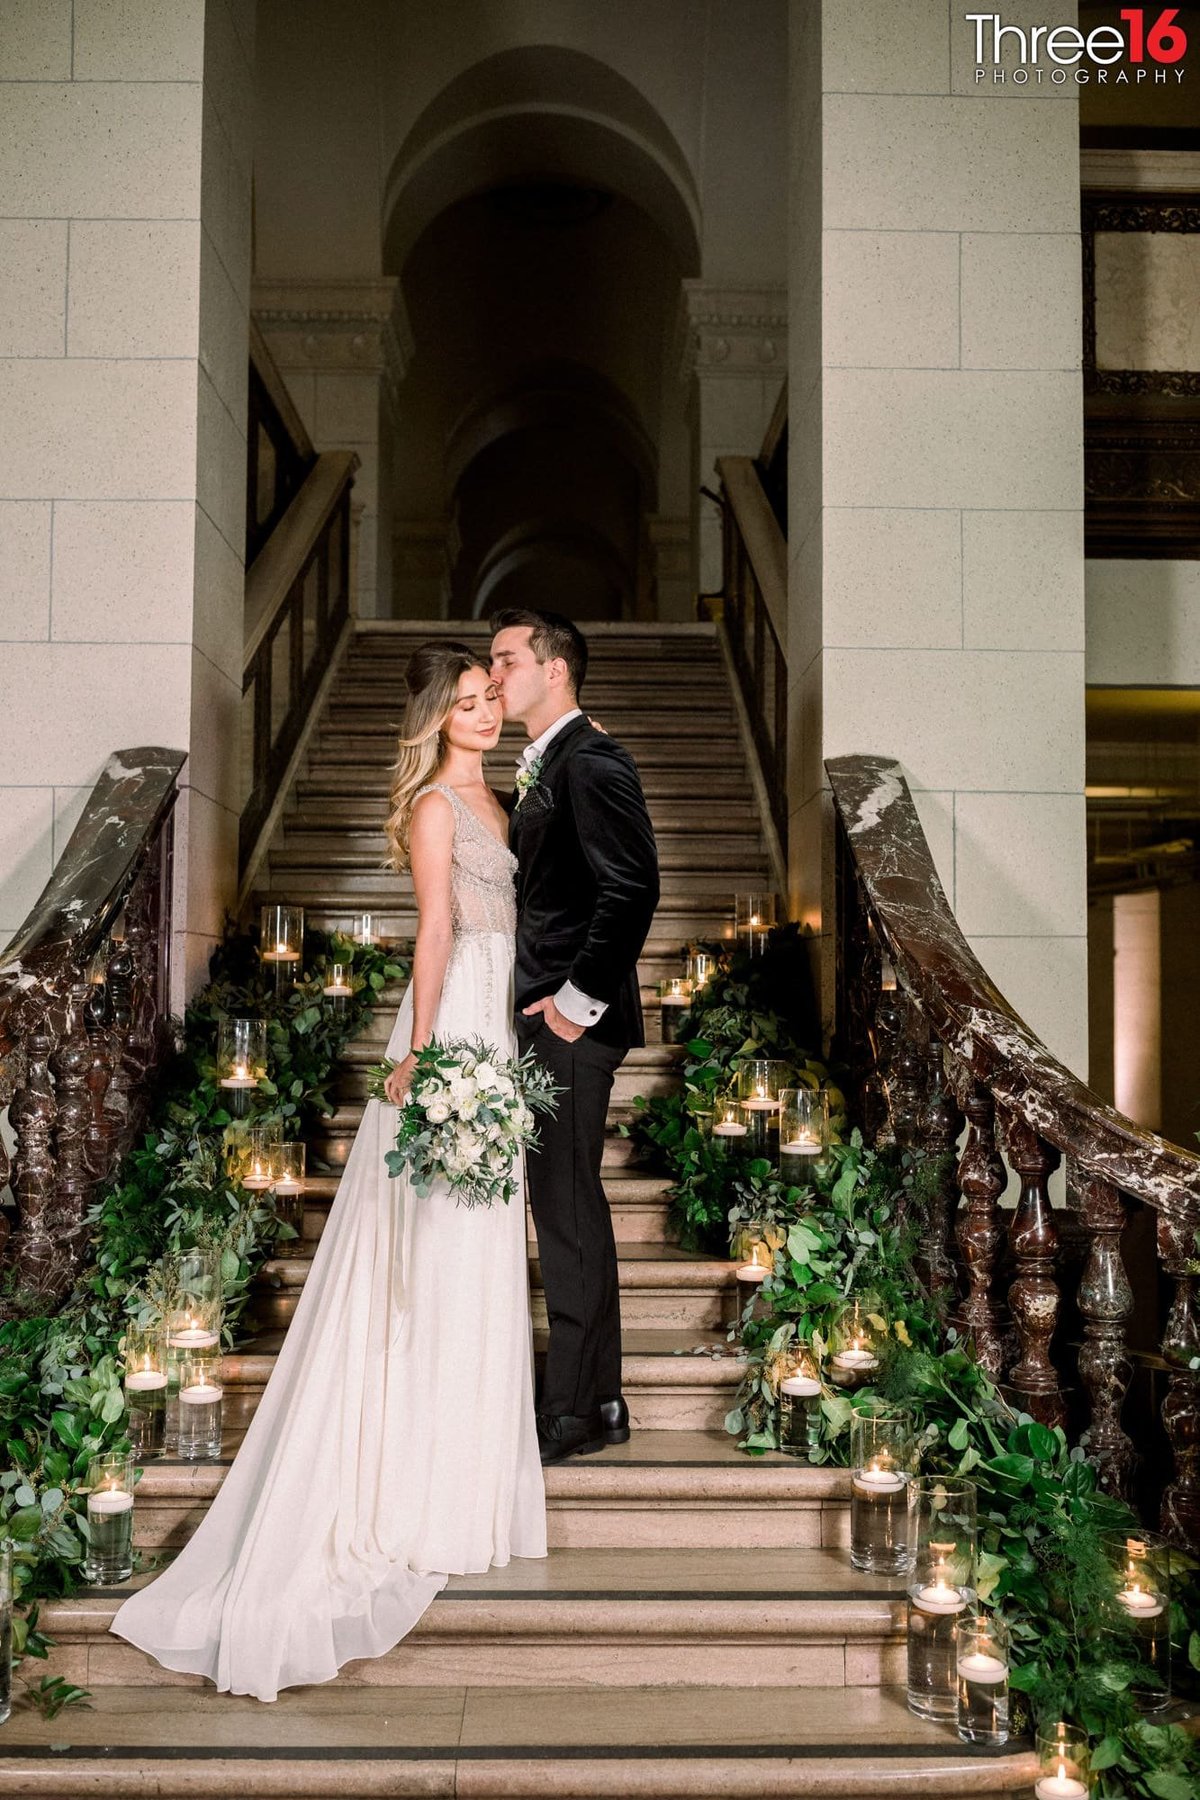 Beautifully designed stairwell with Bride and Groom